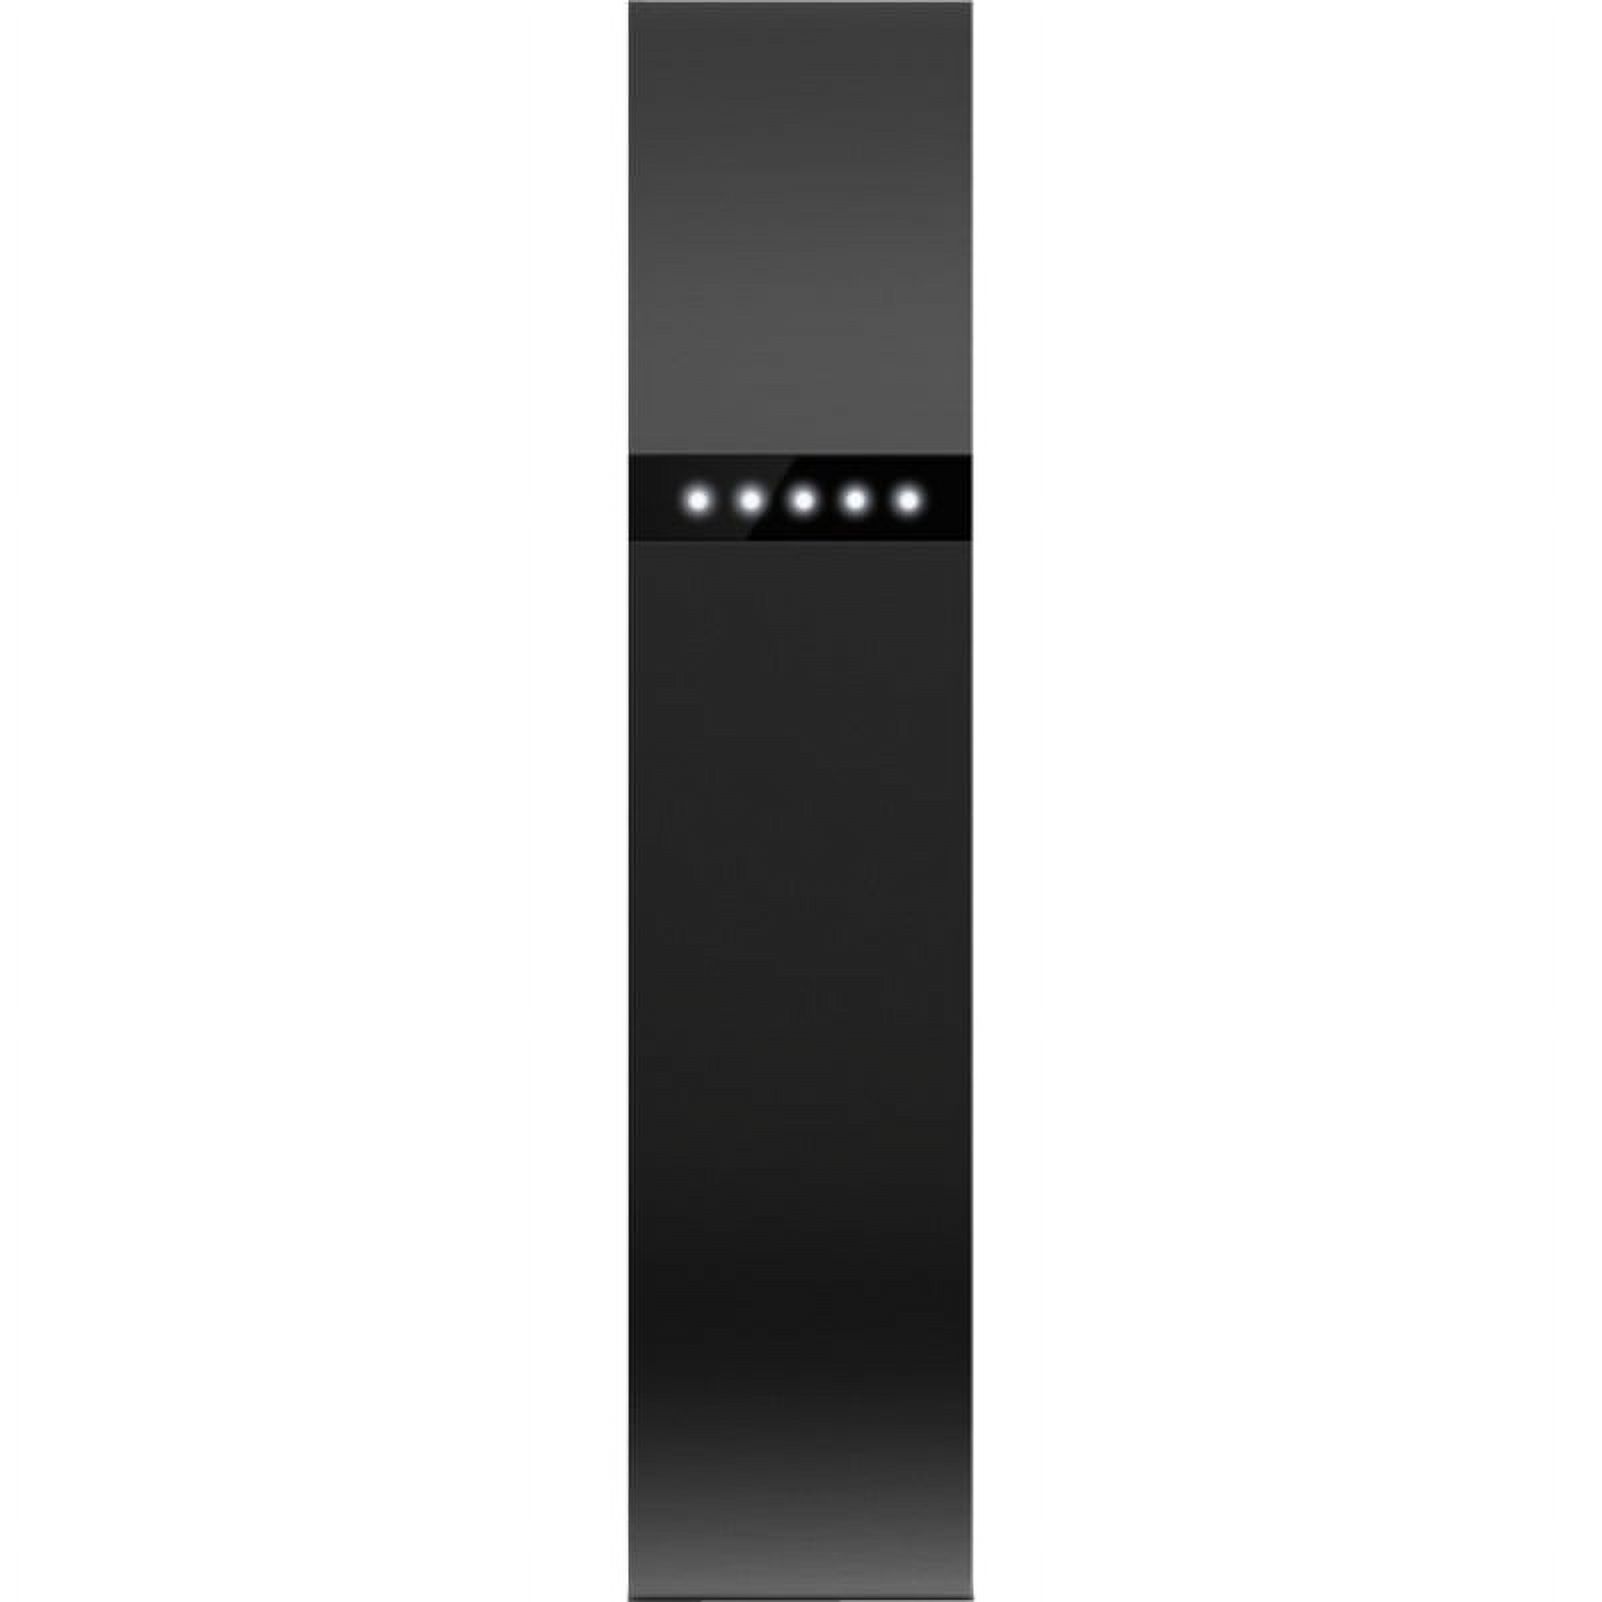 Fitbit Flex Smart Band - image 1 of 2